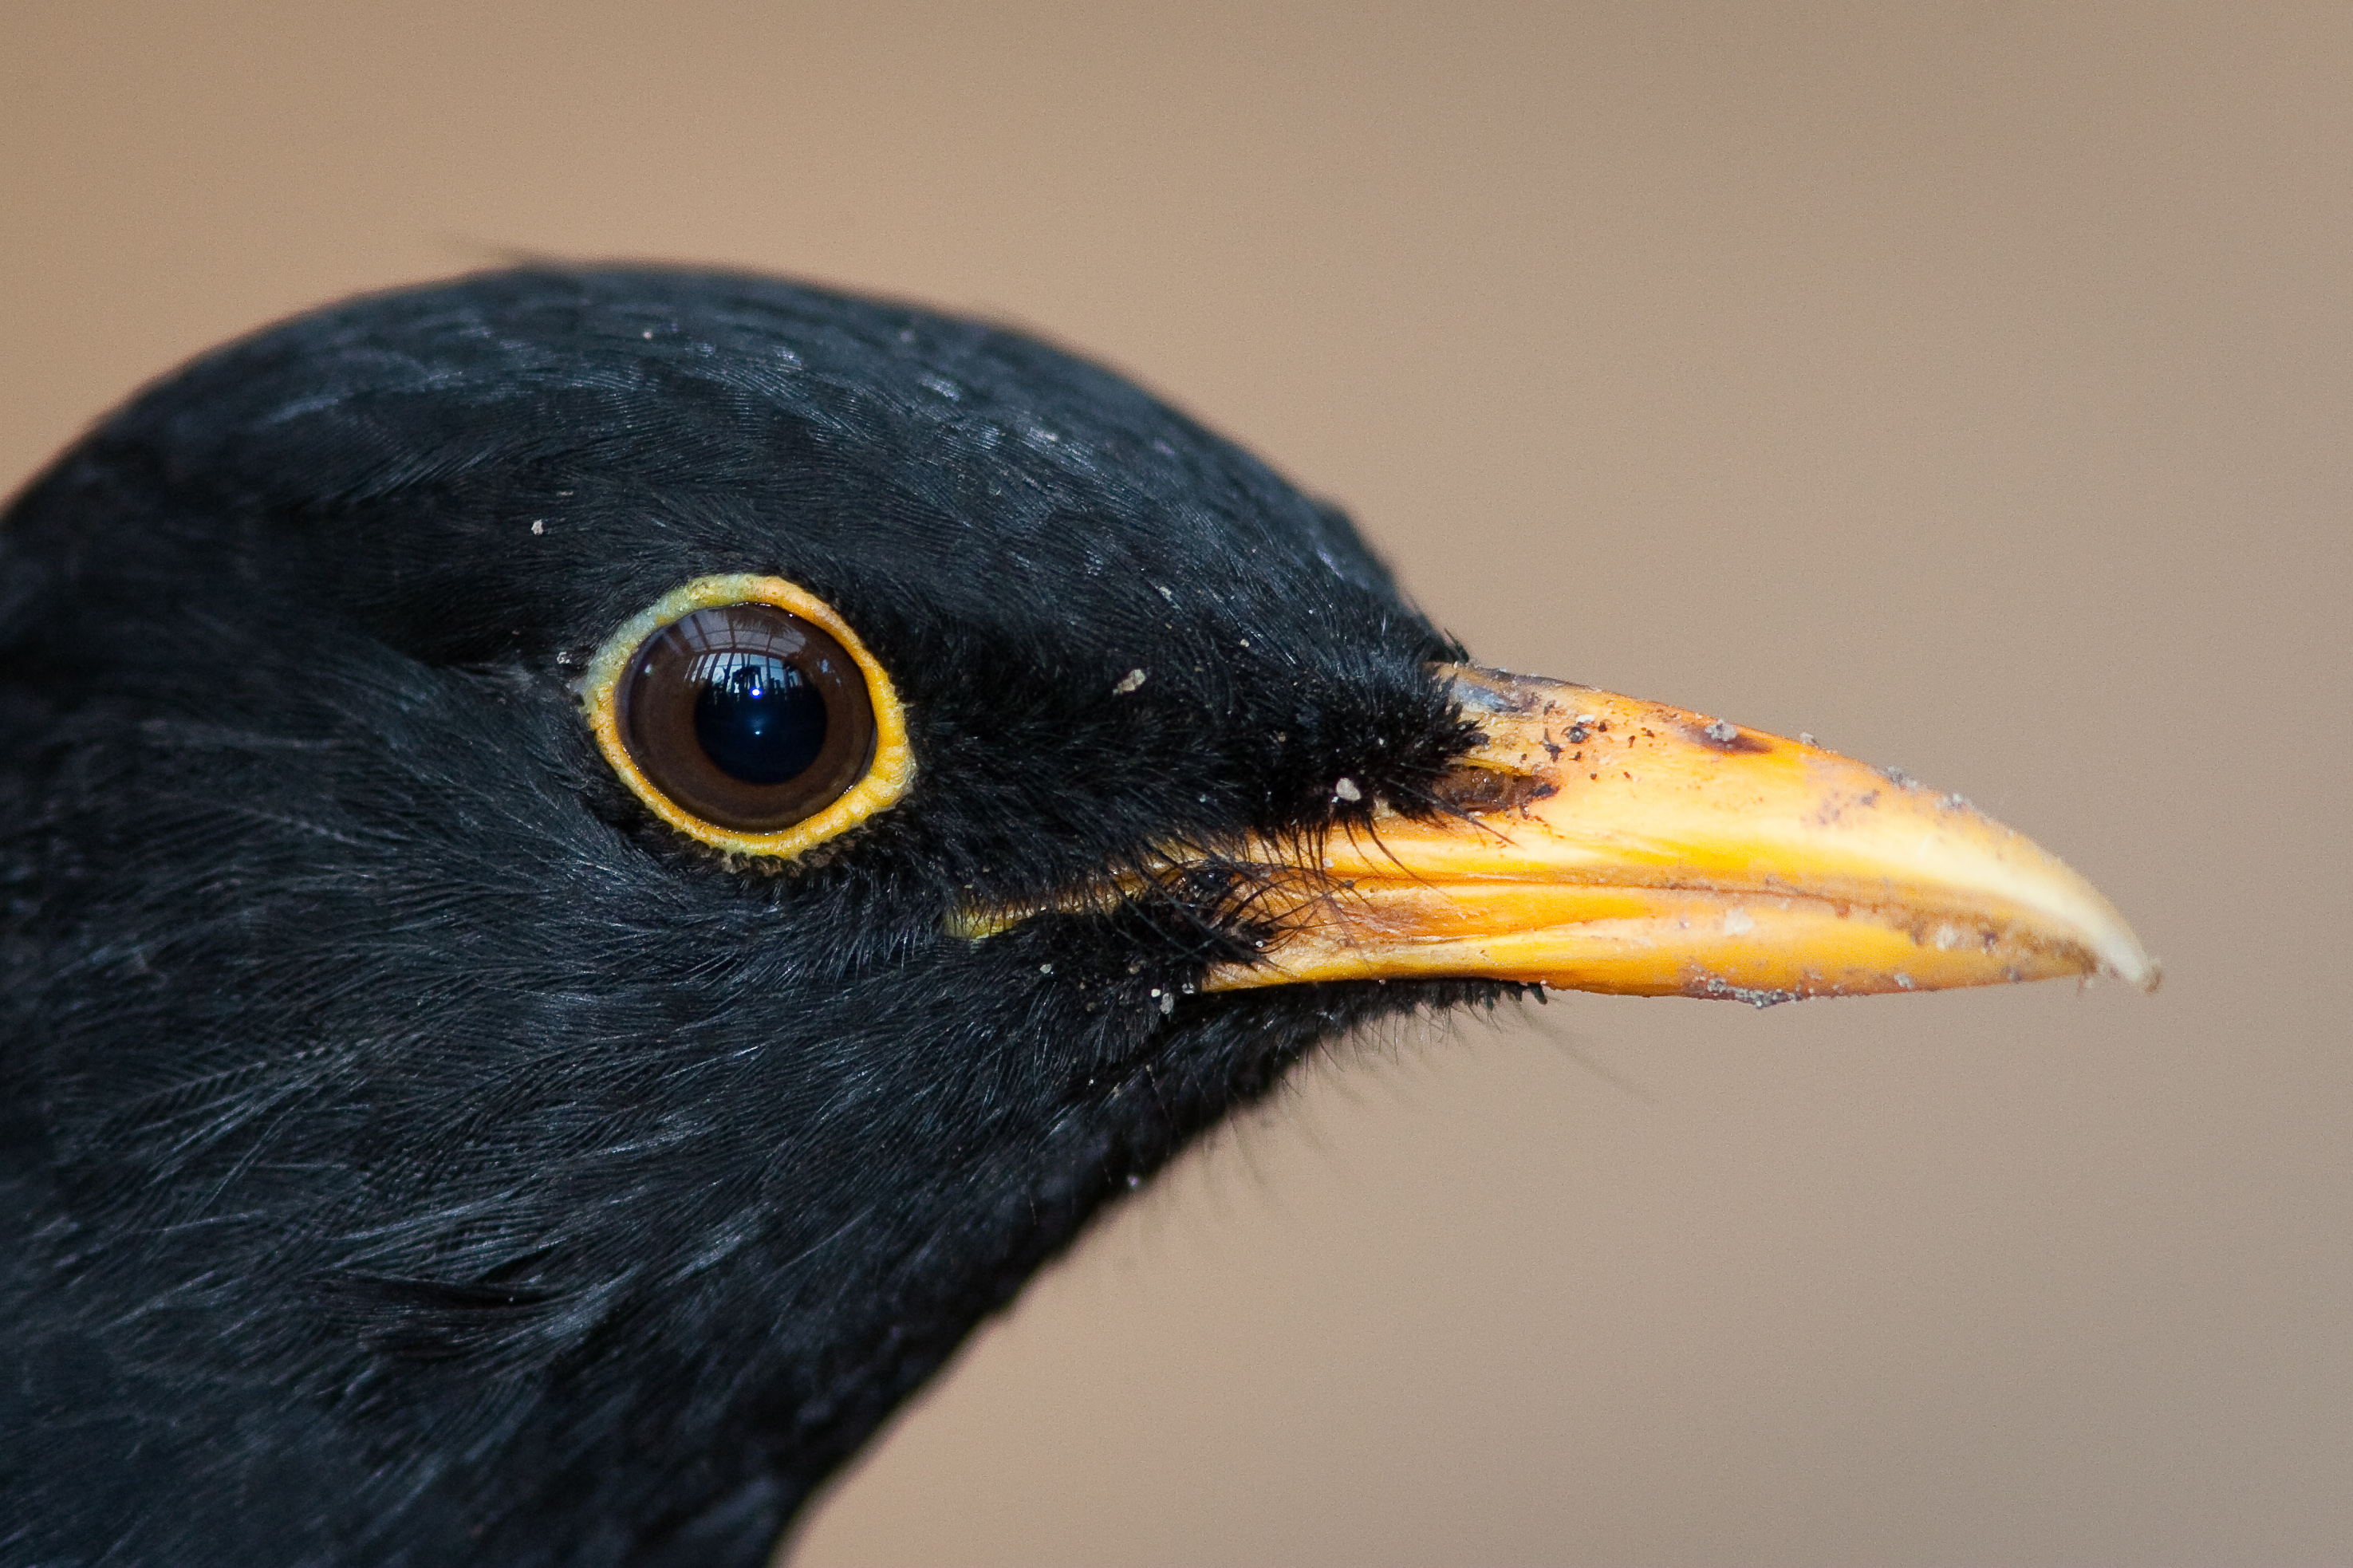 The picture shows a male blackbird.